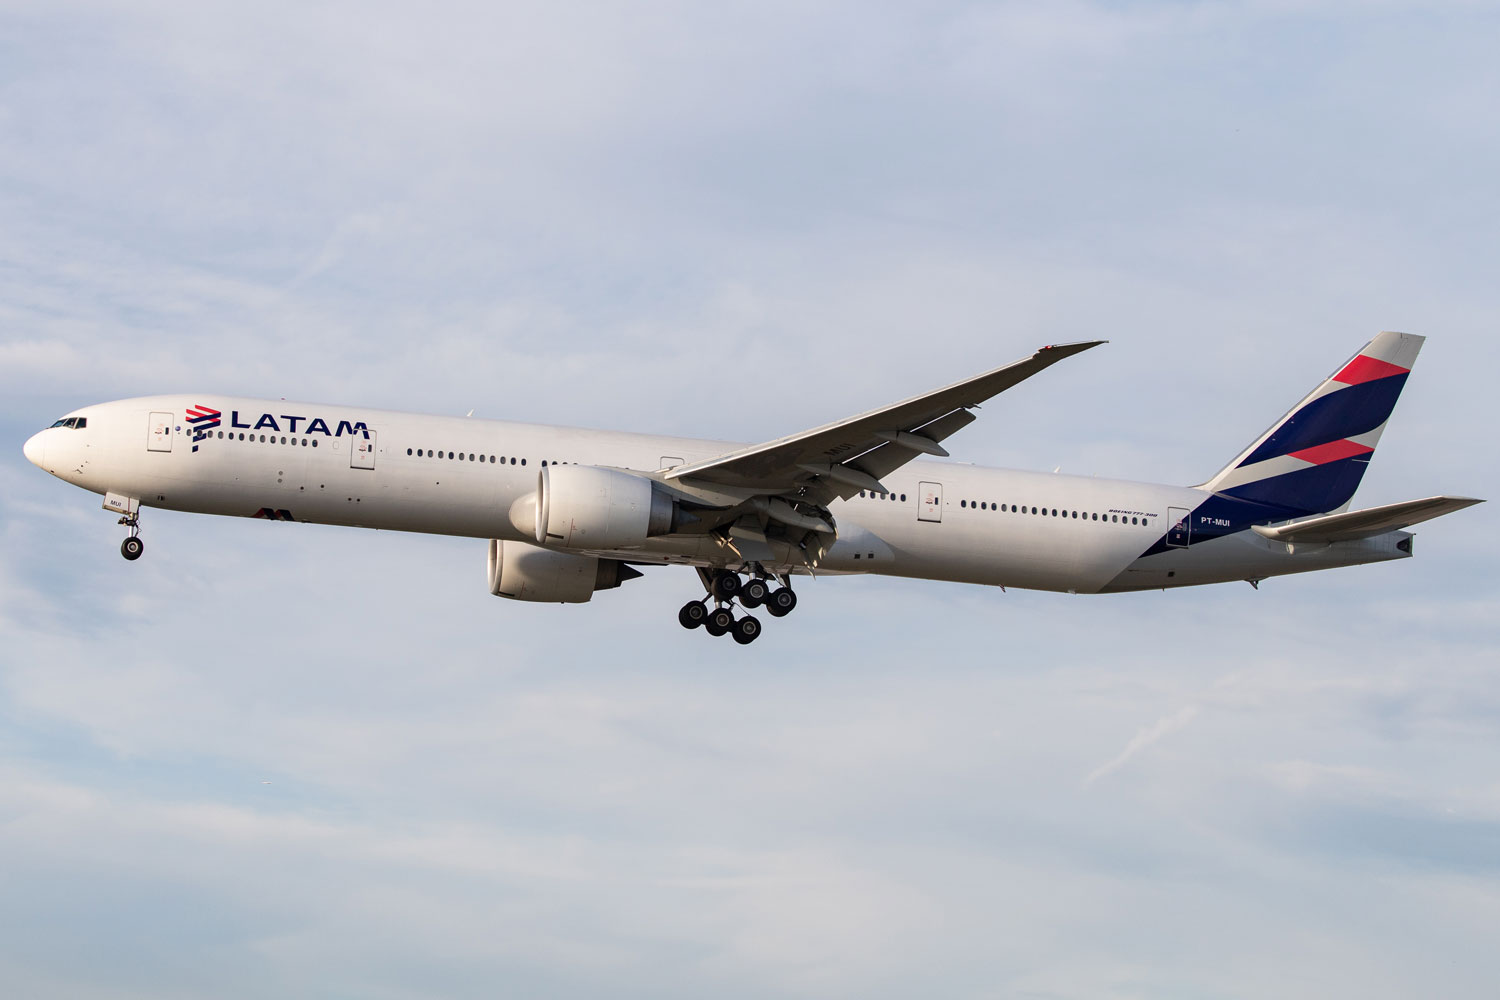 LATAM Brasil will launch service from Sao Paulo to Los Angeles in